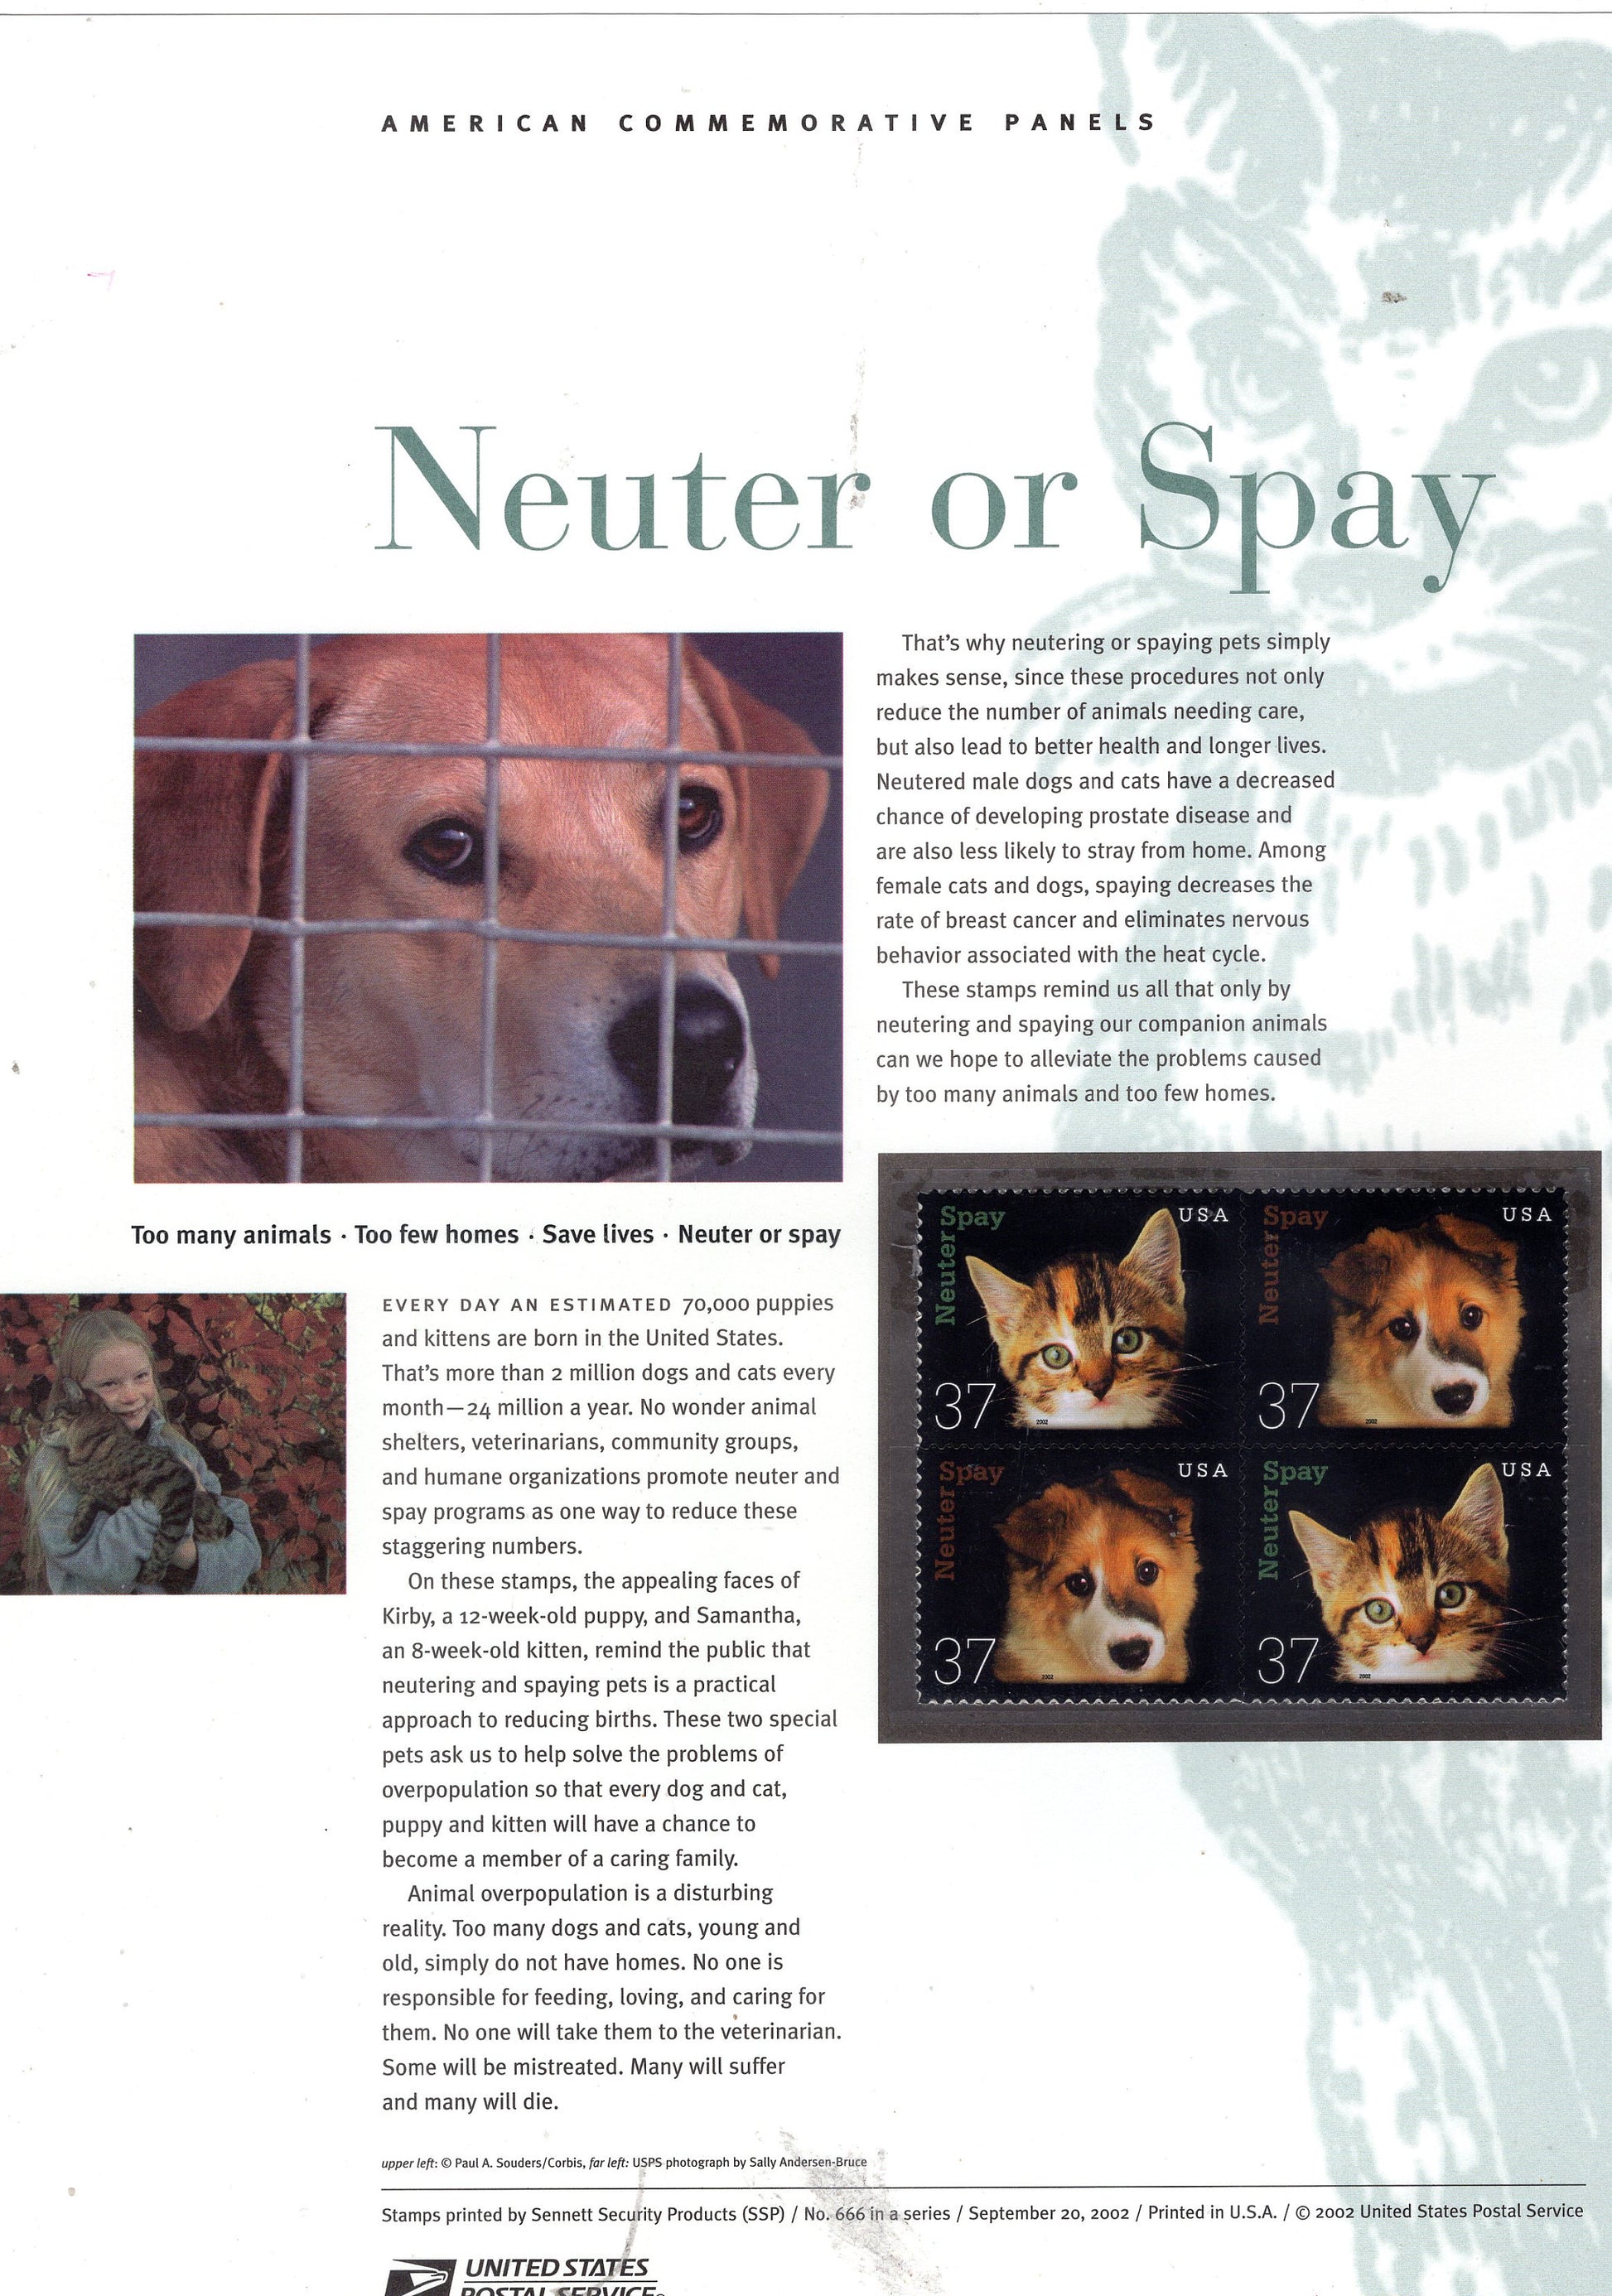 PETS SPAY NEUTER Dog Cat Commemorative Panel with a Block of 4 Stamps Illustrations plus Text – A Great Gift 8.5x11 - Issued in 2002 Stck# 666 -